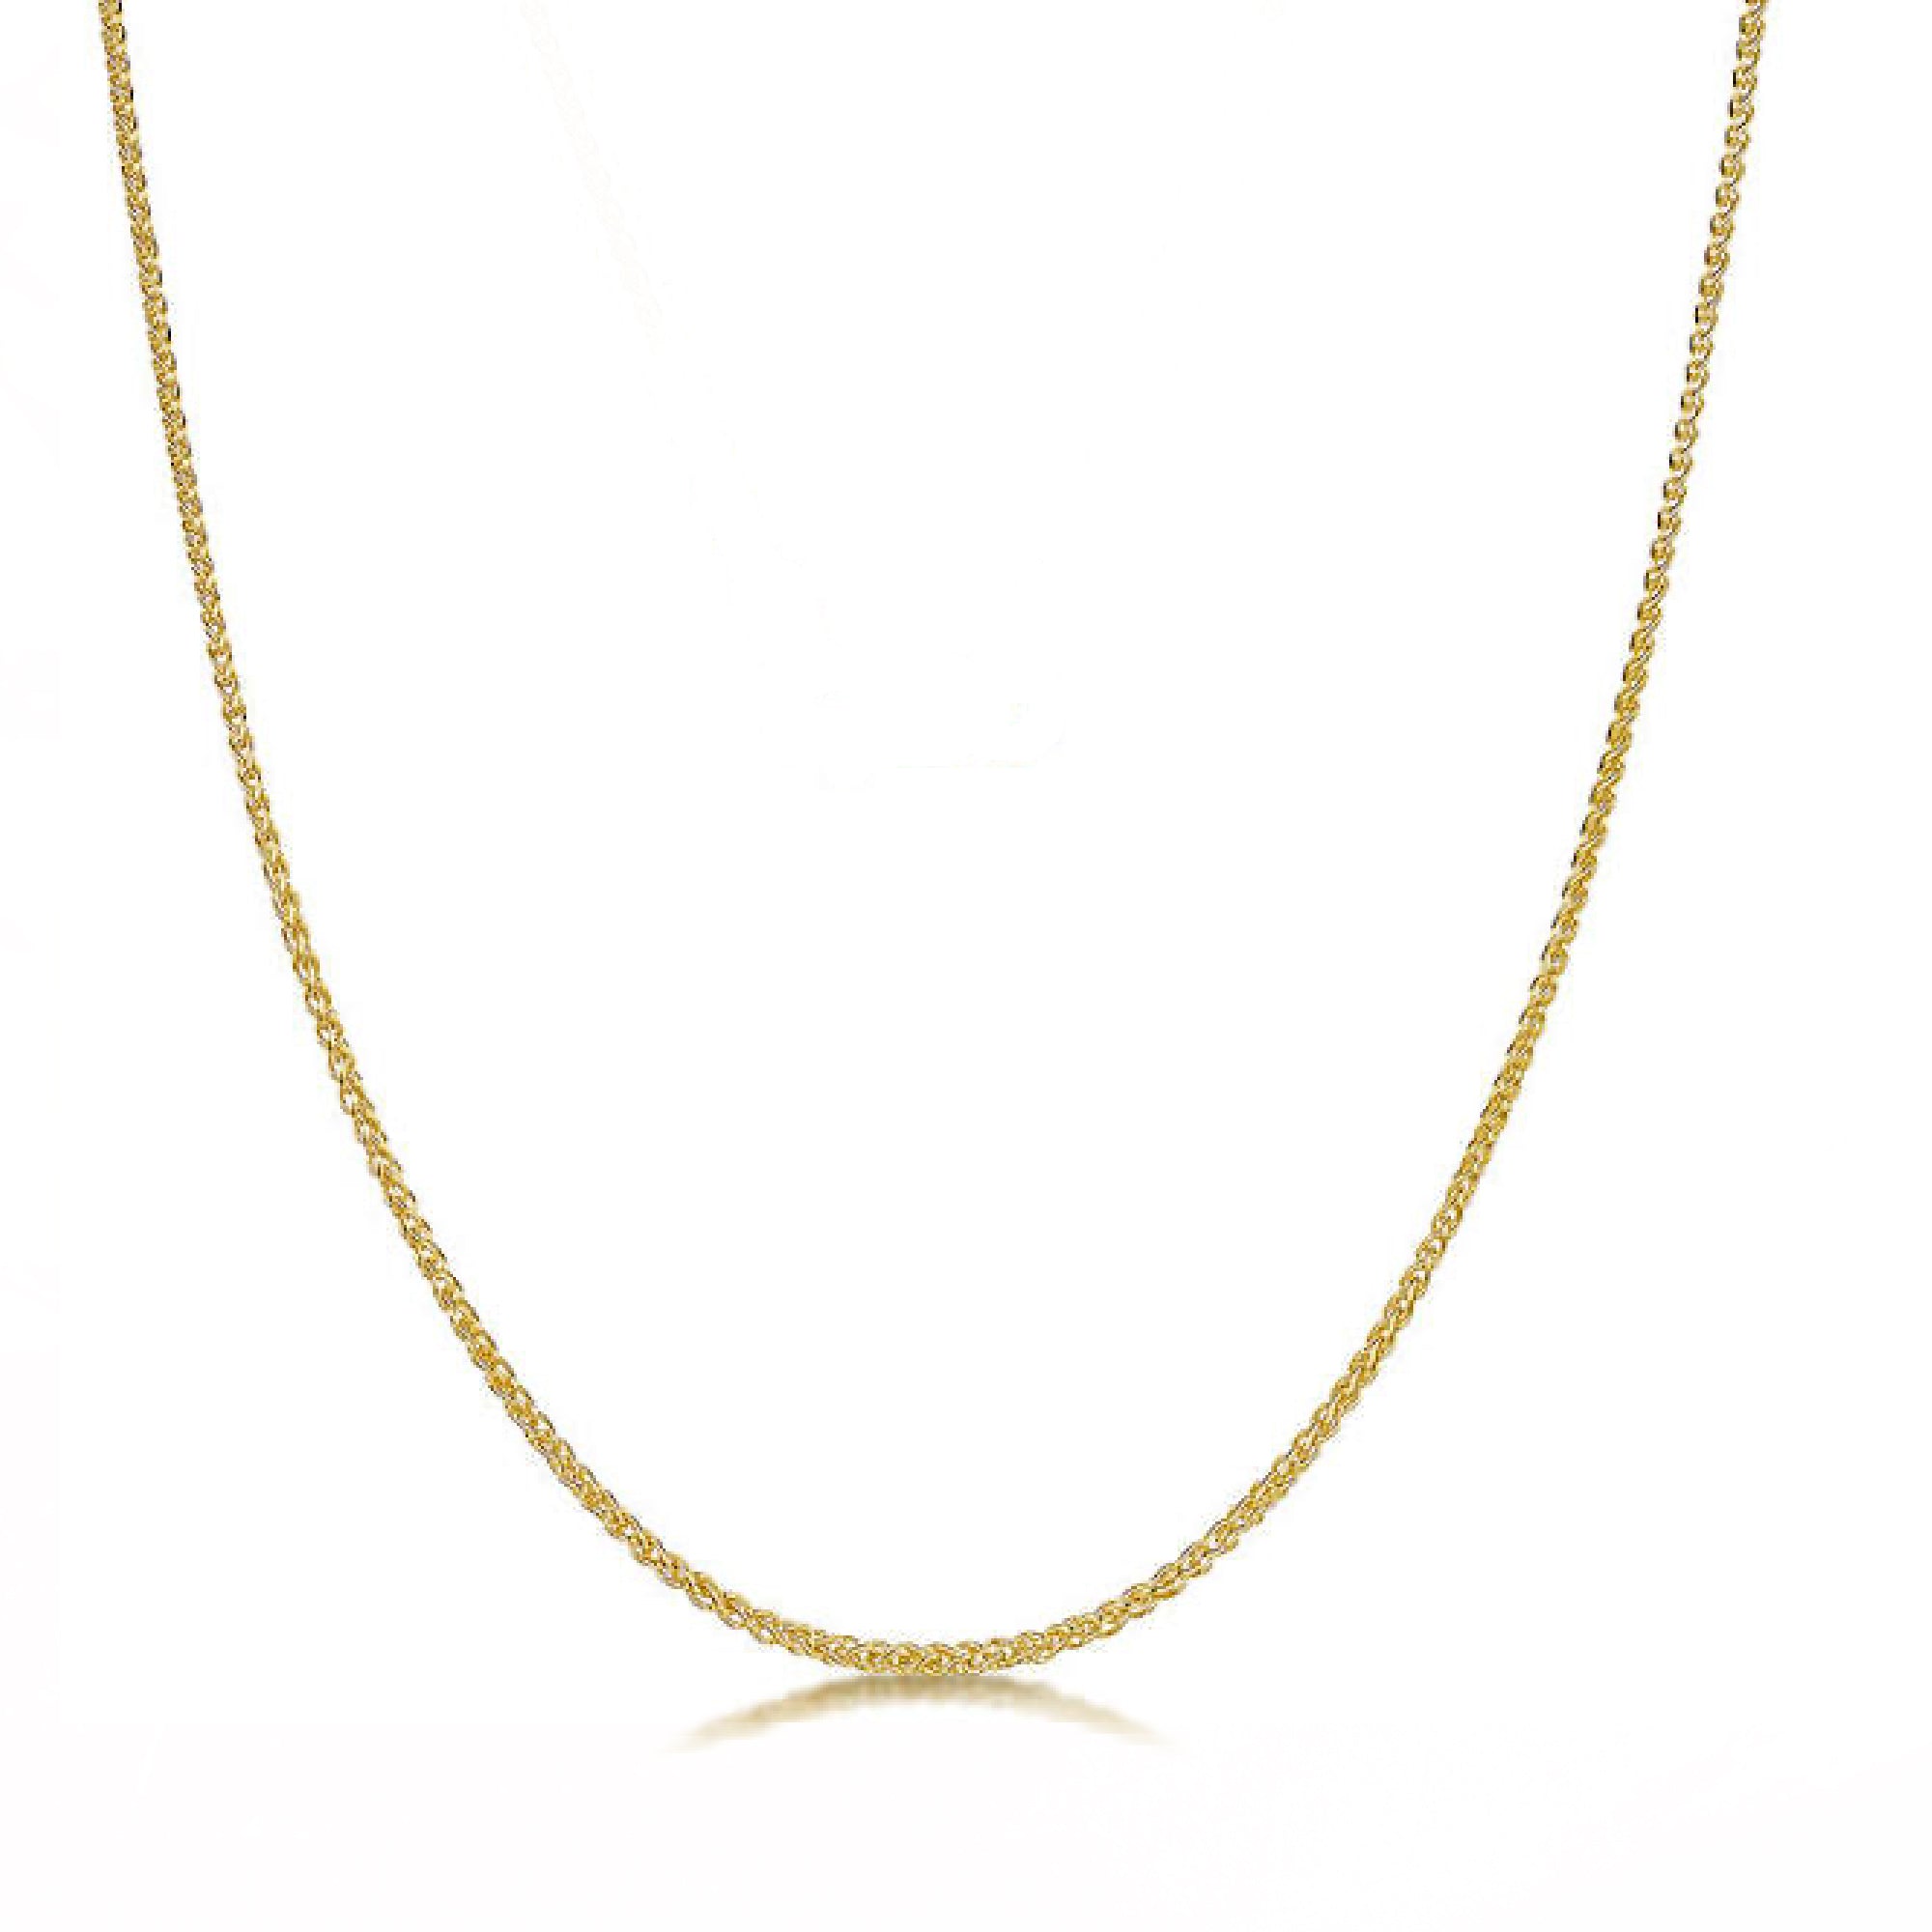 1.7mm heavy 9ct solid gold spiga chain necklace